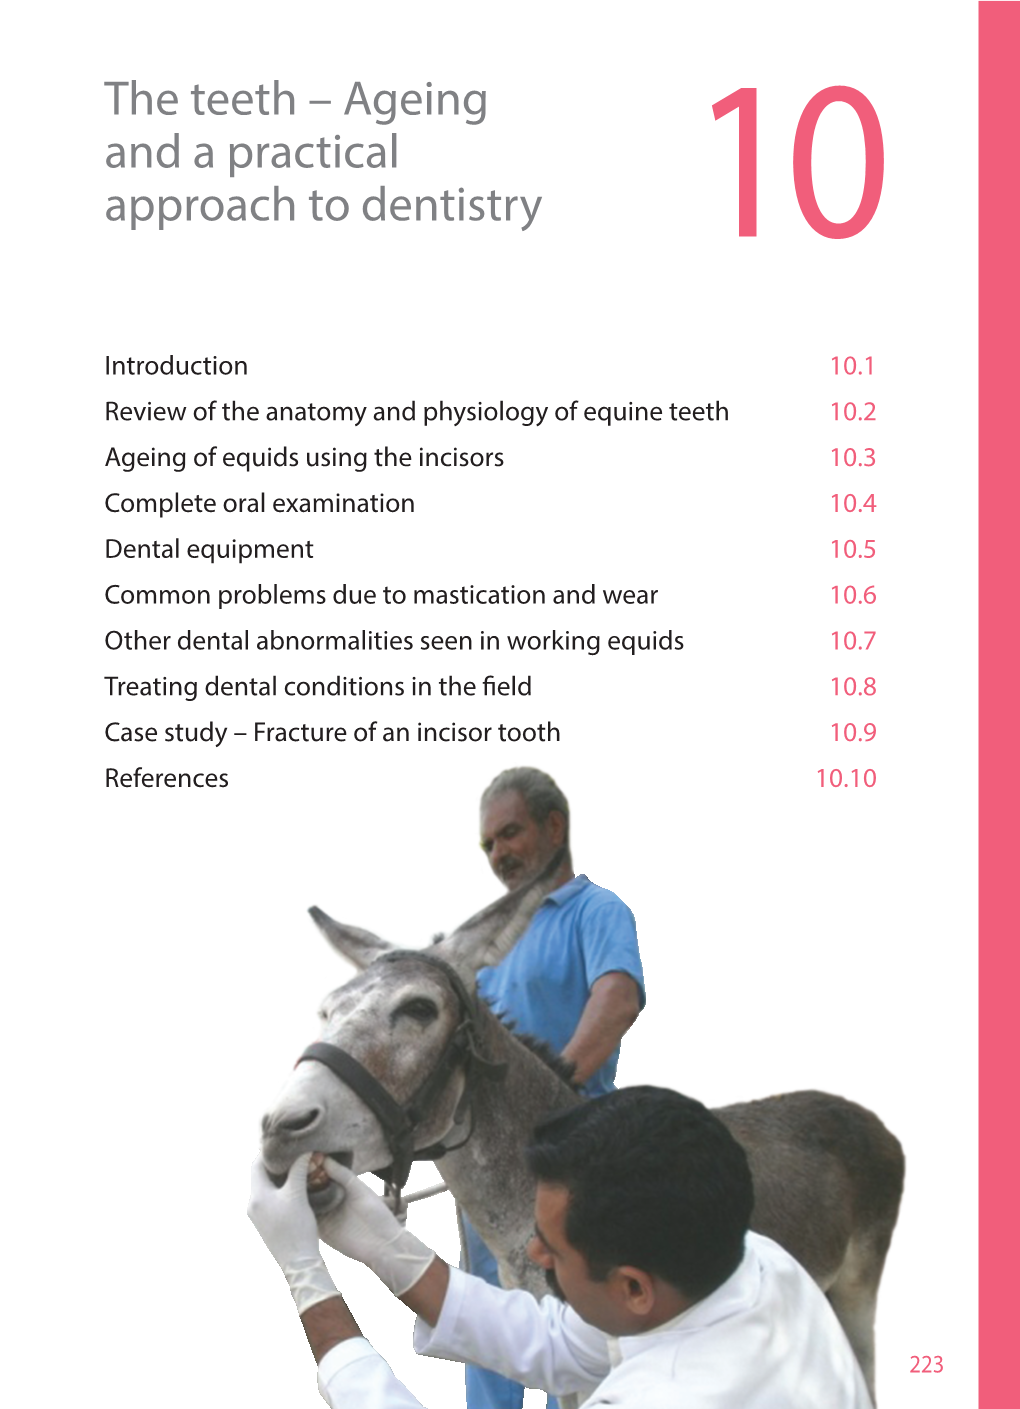 Chapter 10: the Teeth – Ageing and a Practical Approach to Dentistry